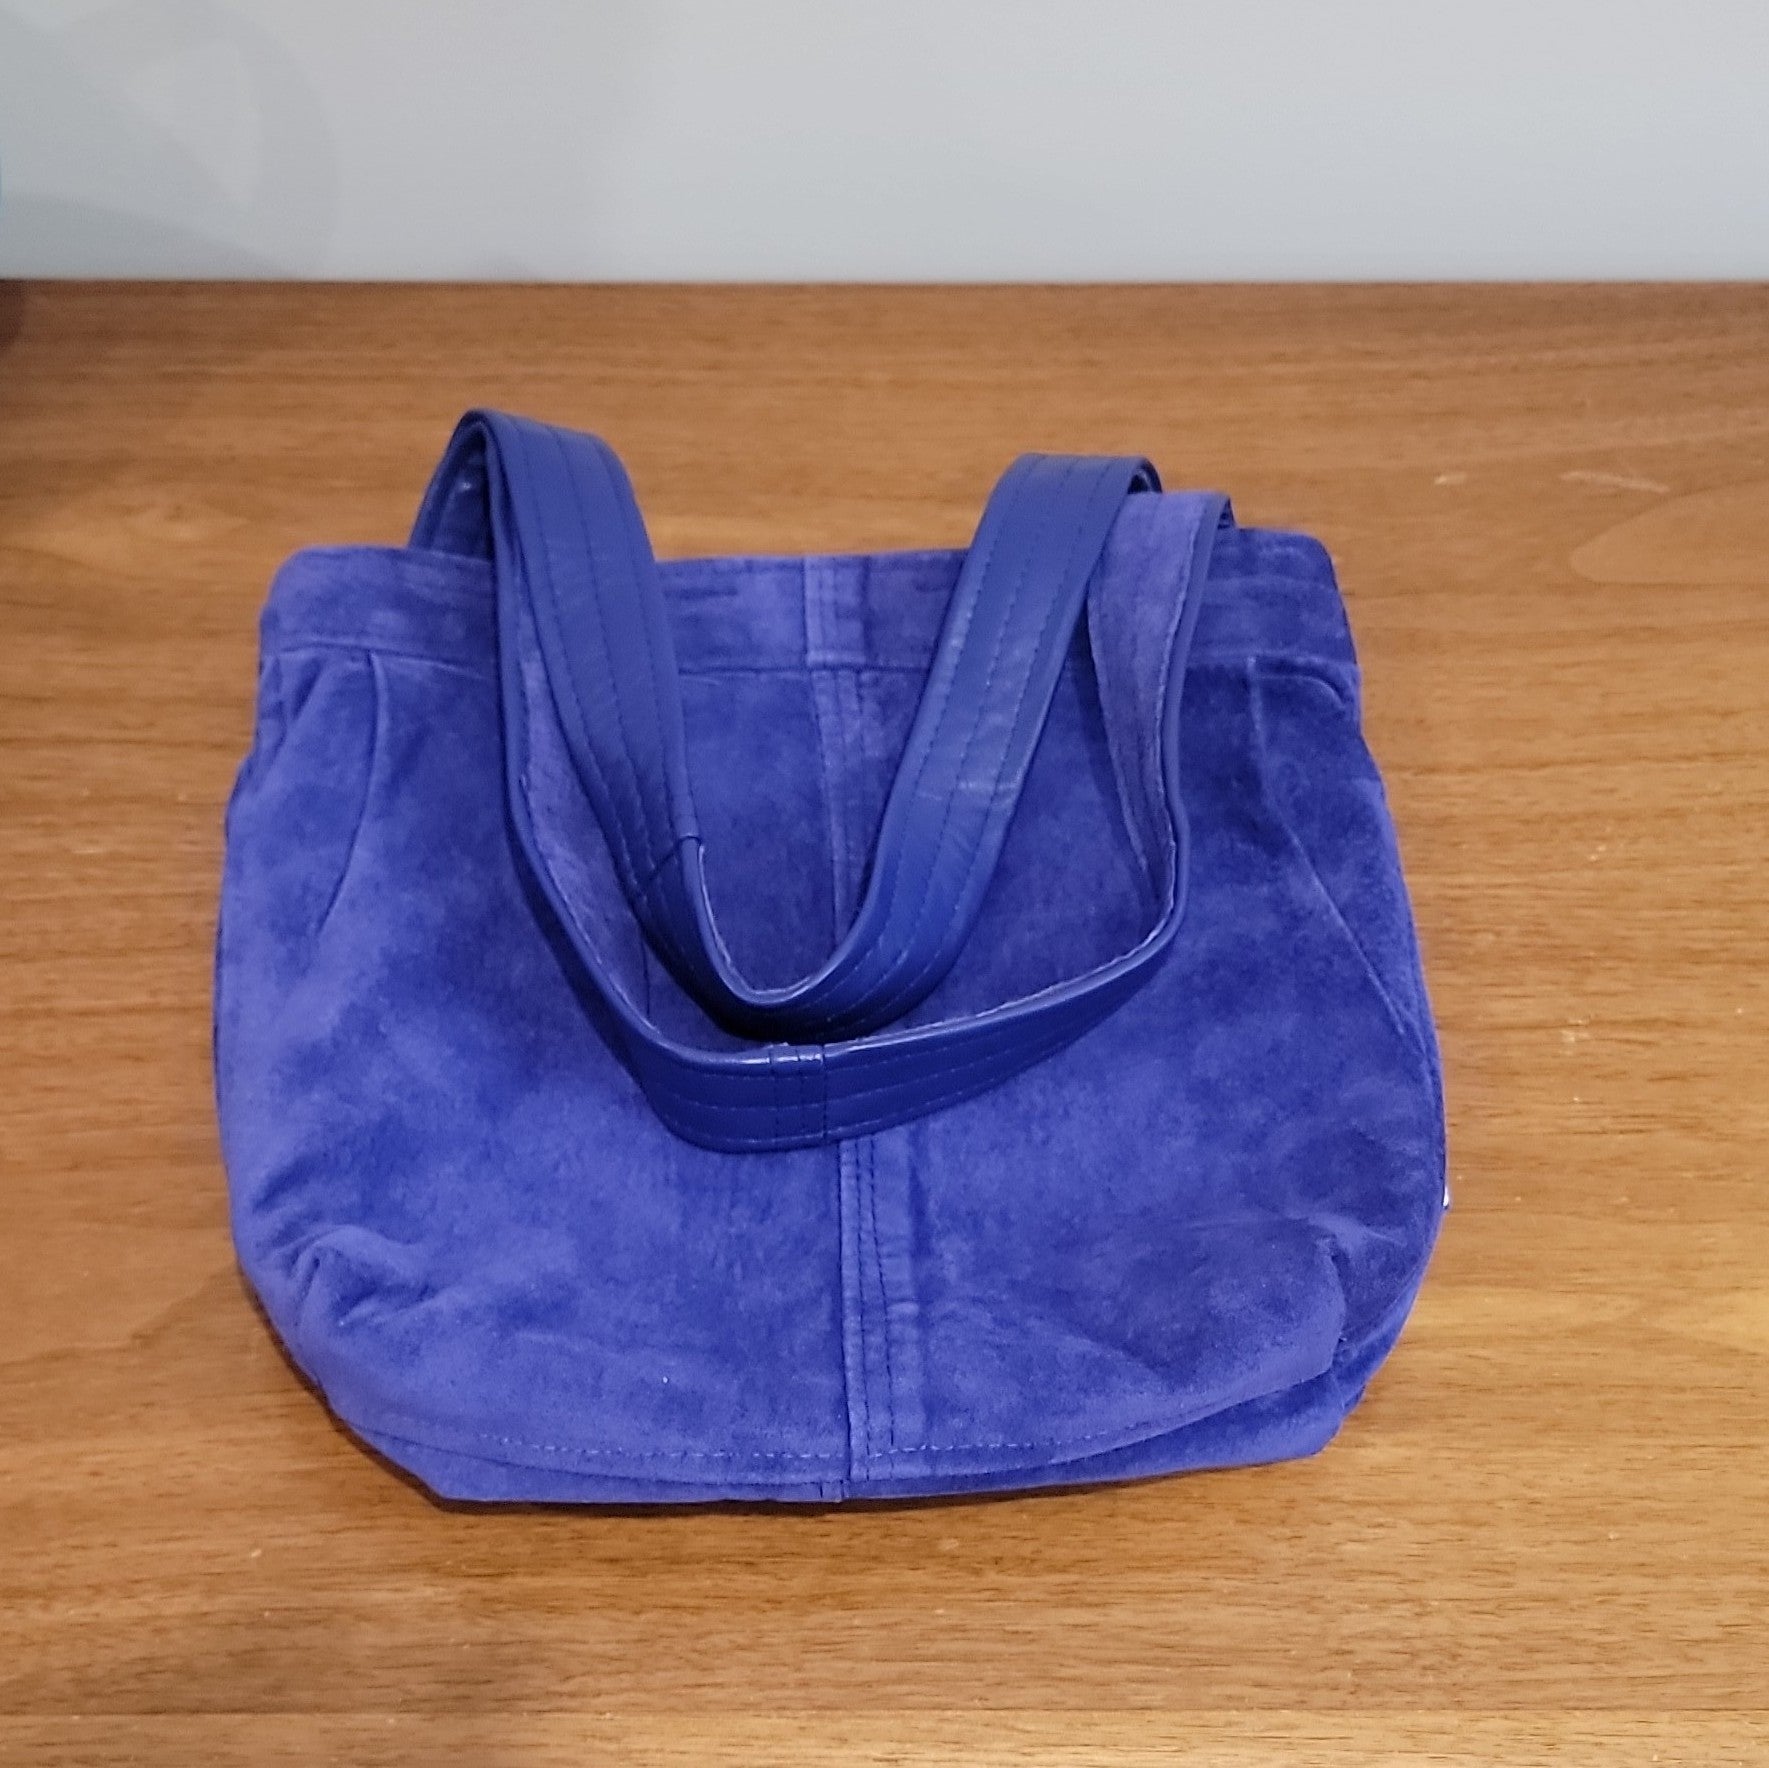 Folli Follie Royal blue Leather Extra Large Tote Purse w/ Inside Pouch Suede  | eBay